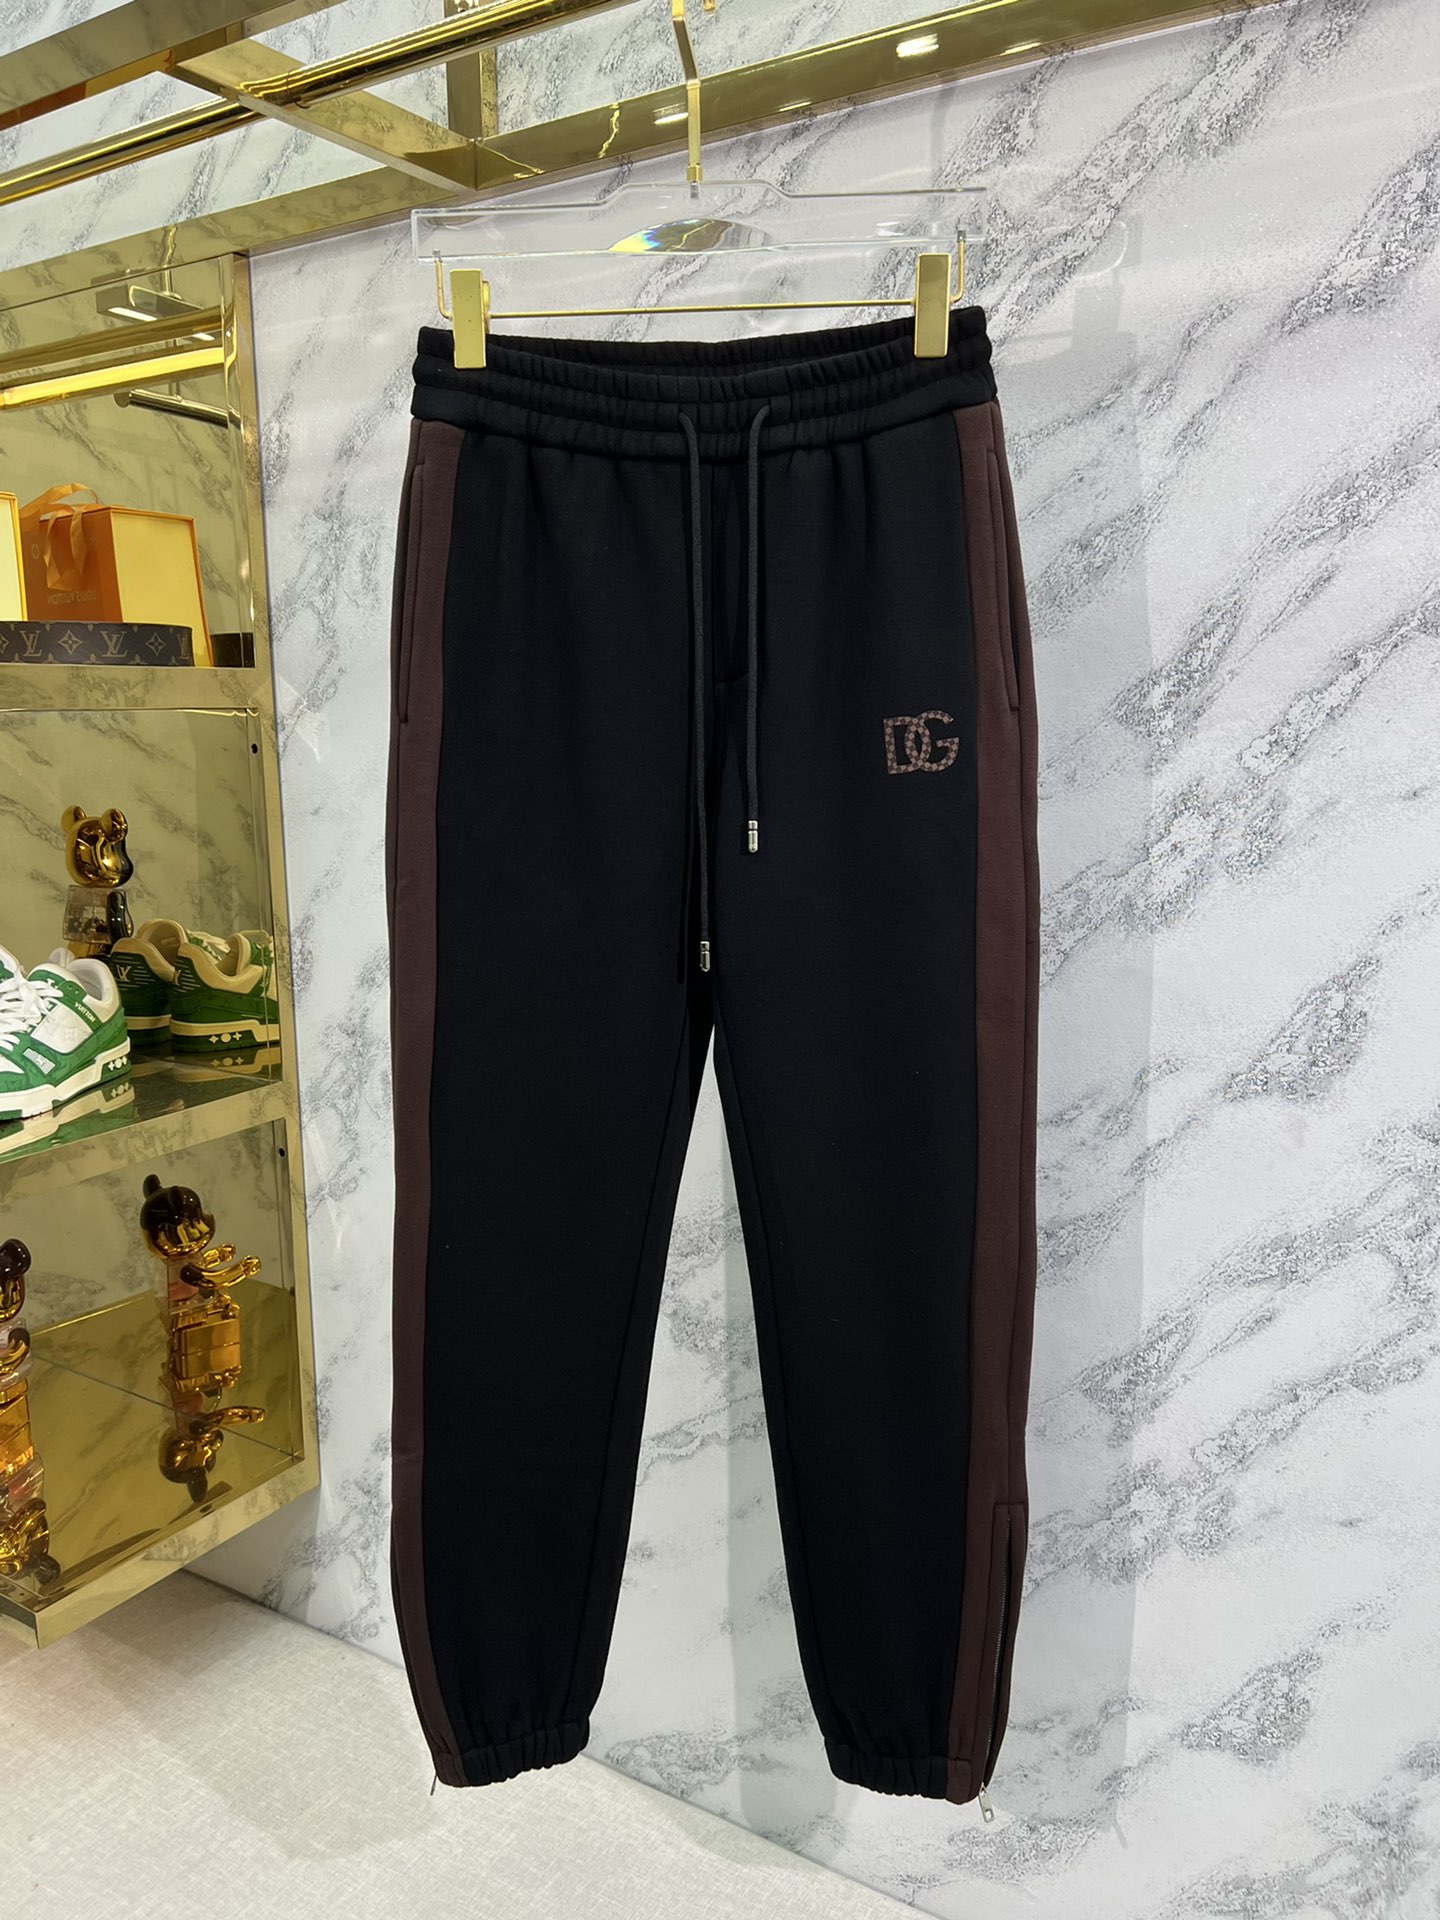 Dolce & Gabbana Clothing Pants & Trousers Black Gold Yellow Unisex Men Cotton Knitting Winter Collection Casual